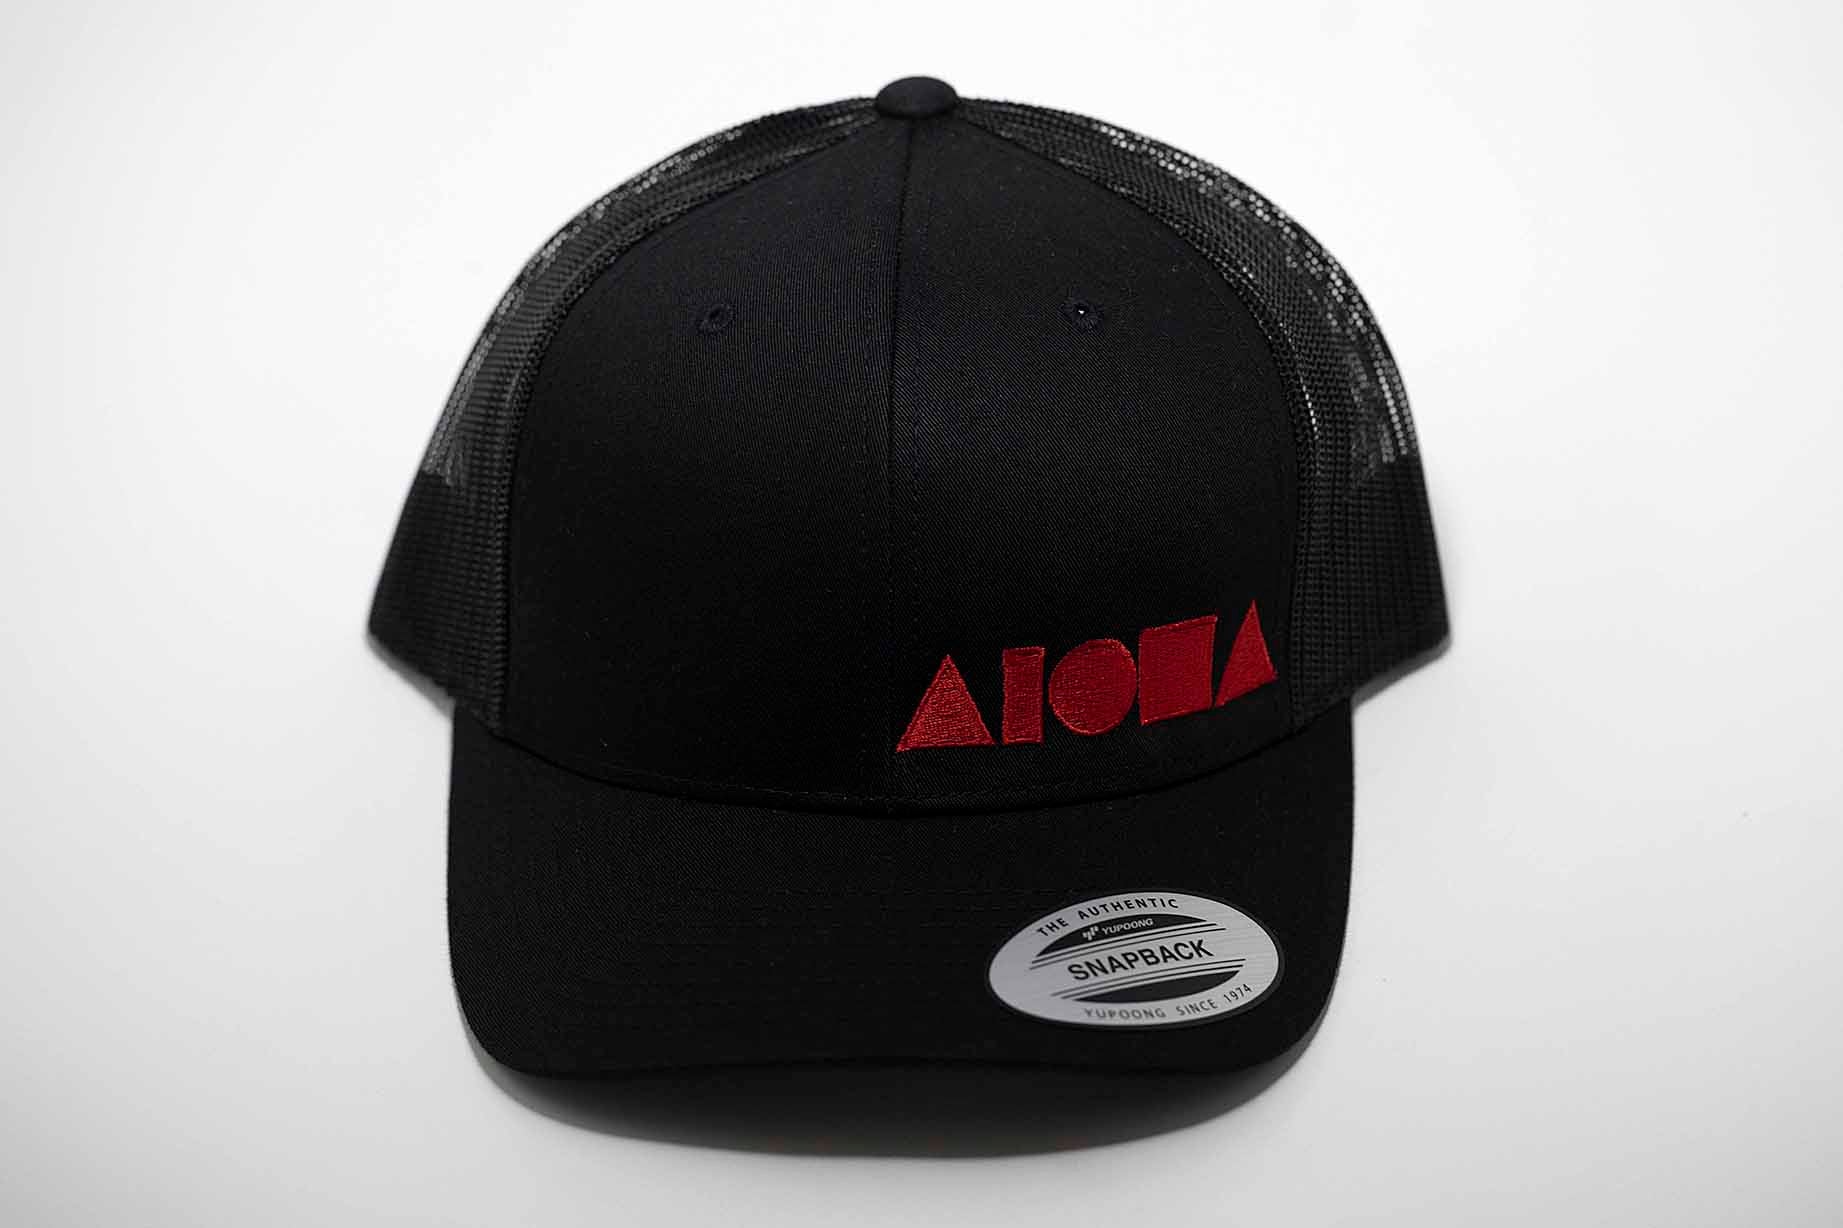 Aloha Shapes ® logo embroidered in red on an all black curved bill/mesh back snapback hat.